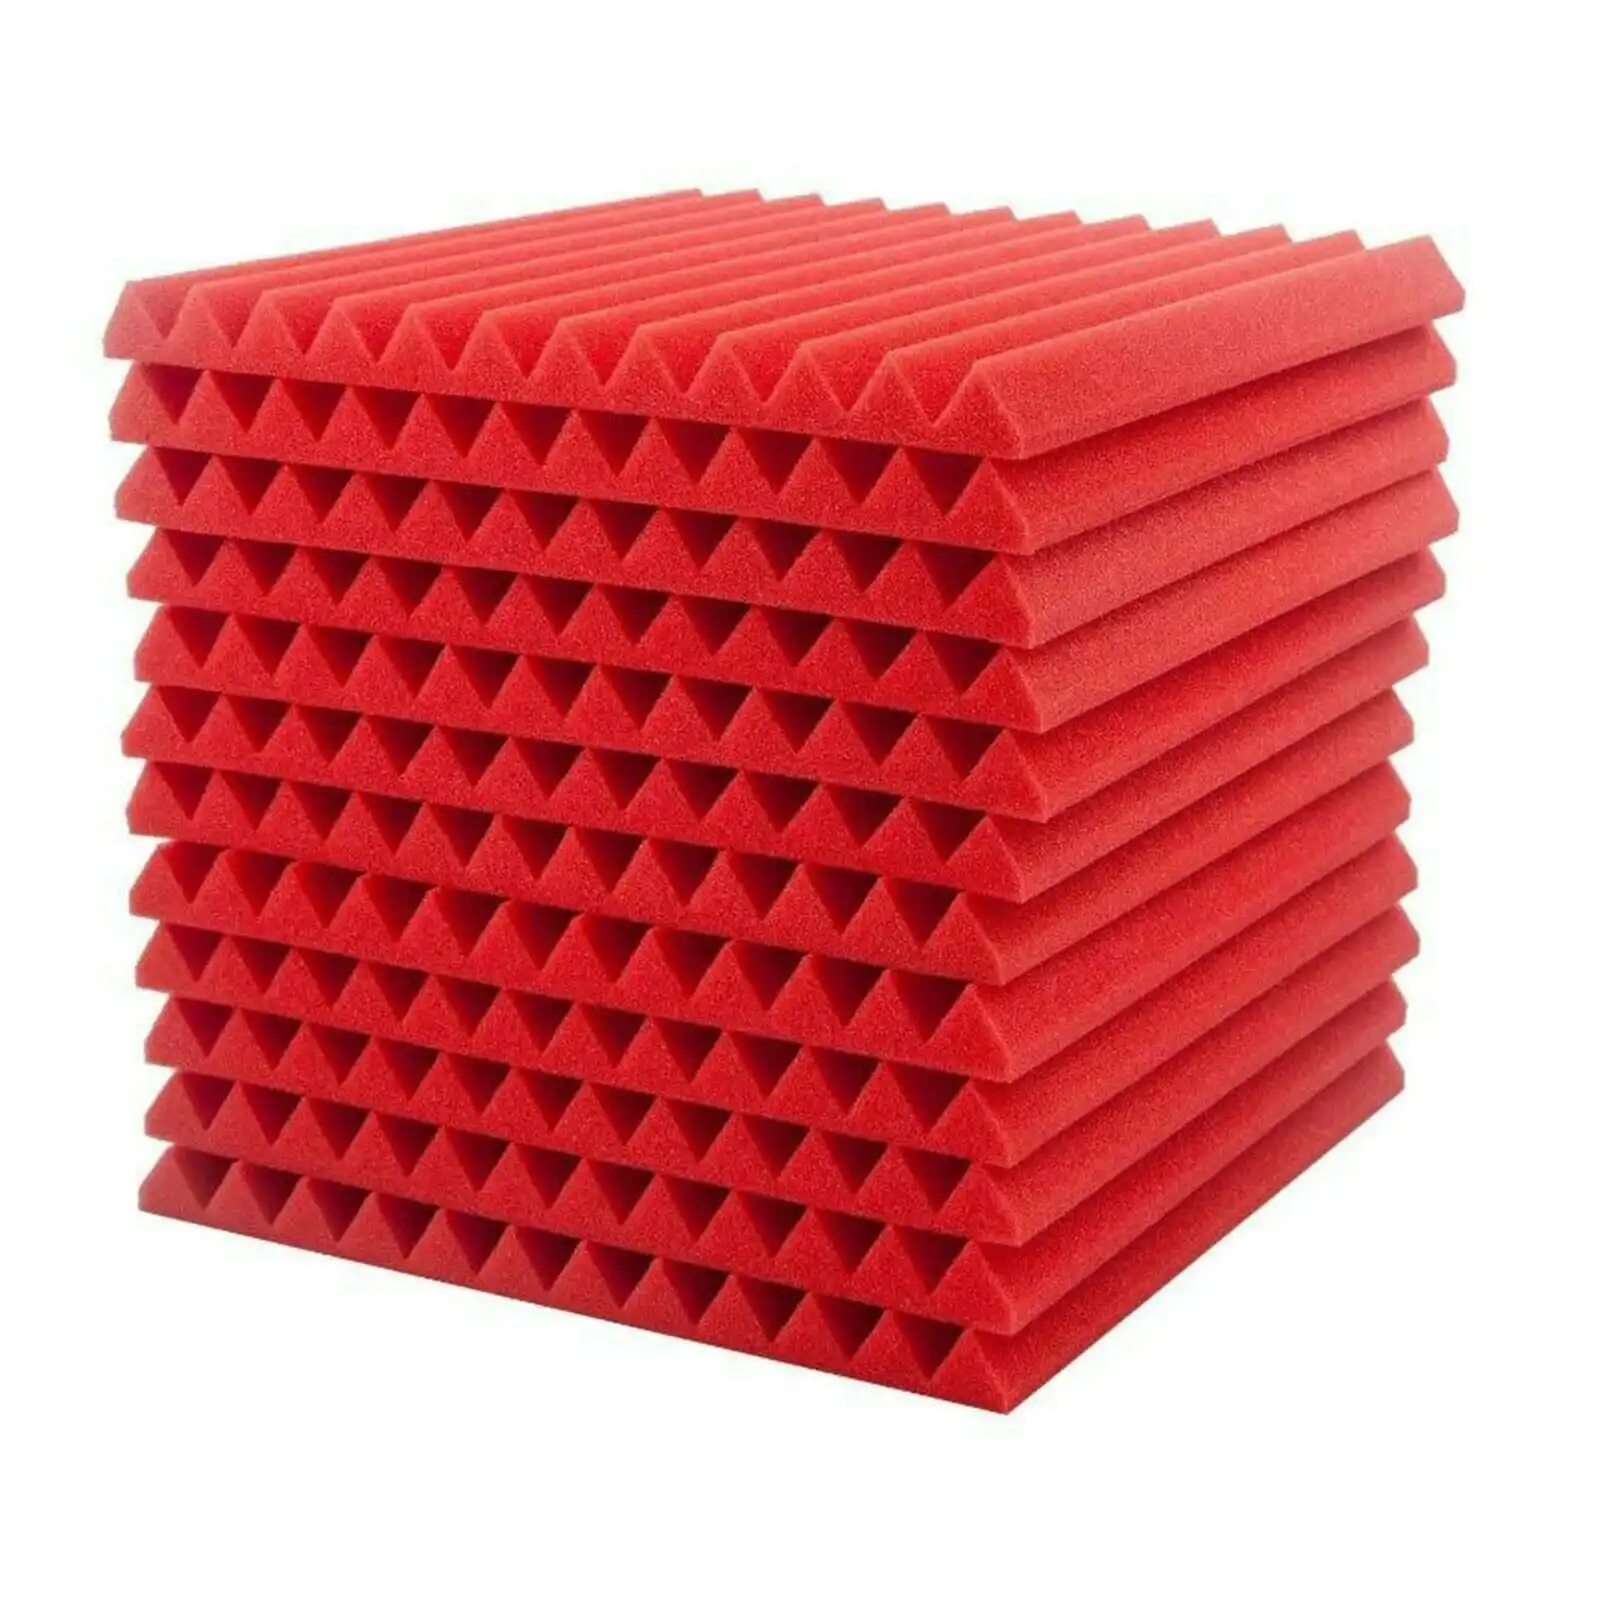 48 Acoustic Soundproof Foam Sound Absorbing Panels 30x30x2.5cm | Red